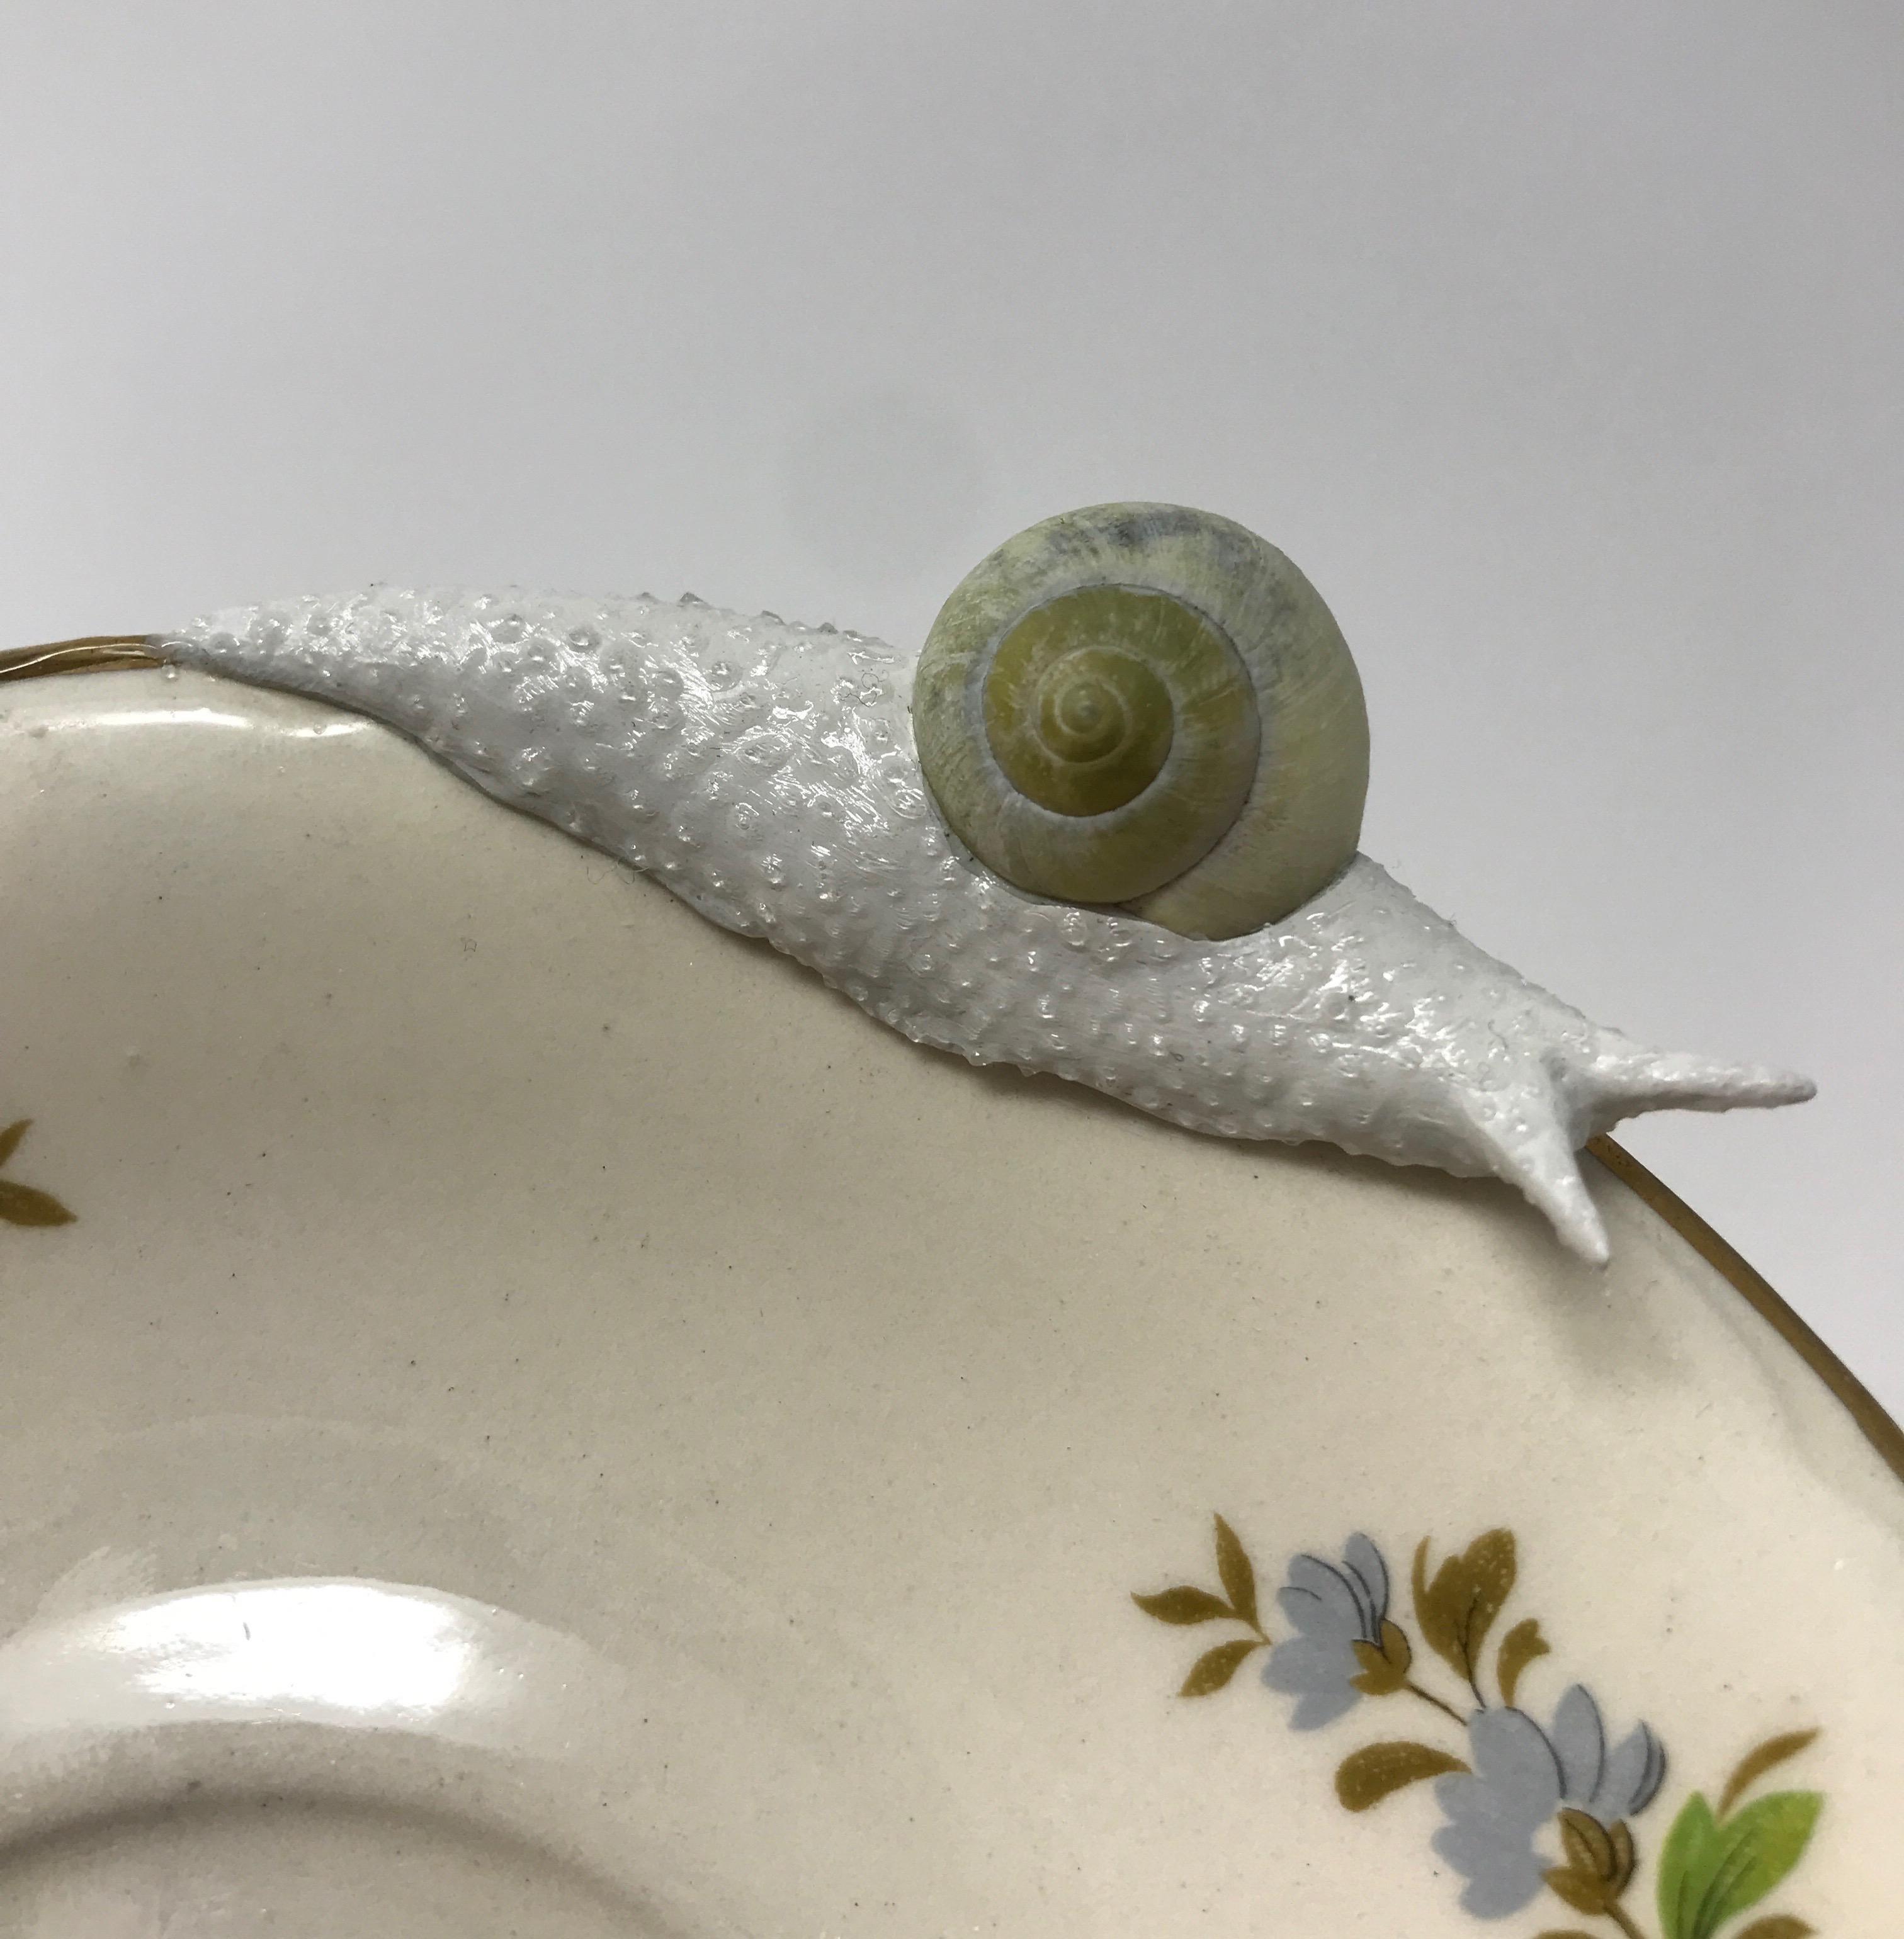 This piece was created with a real found snail shell and durable epoxy clay by New York artist, Bethany Krull to traverse the surface of the floral plate.  The glistening wet snail form is surfaced with many layers of paint before applying the final